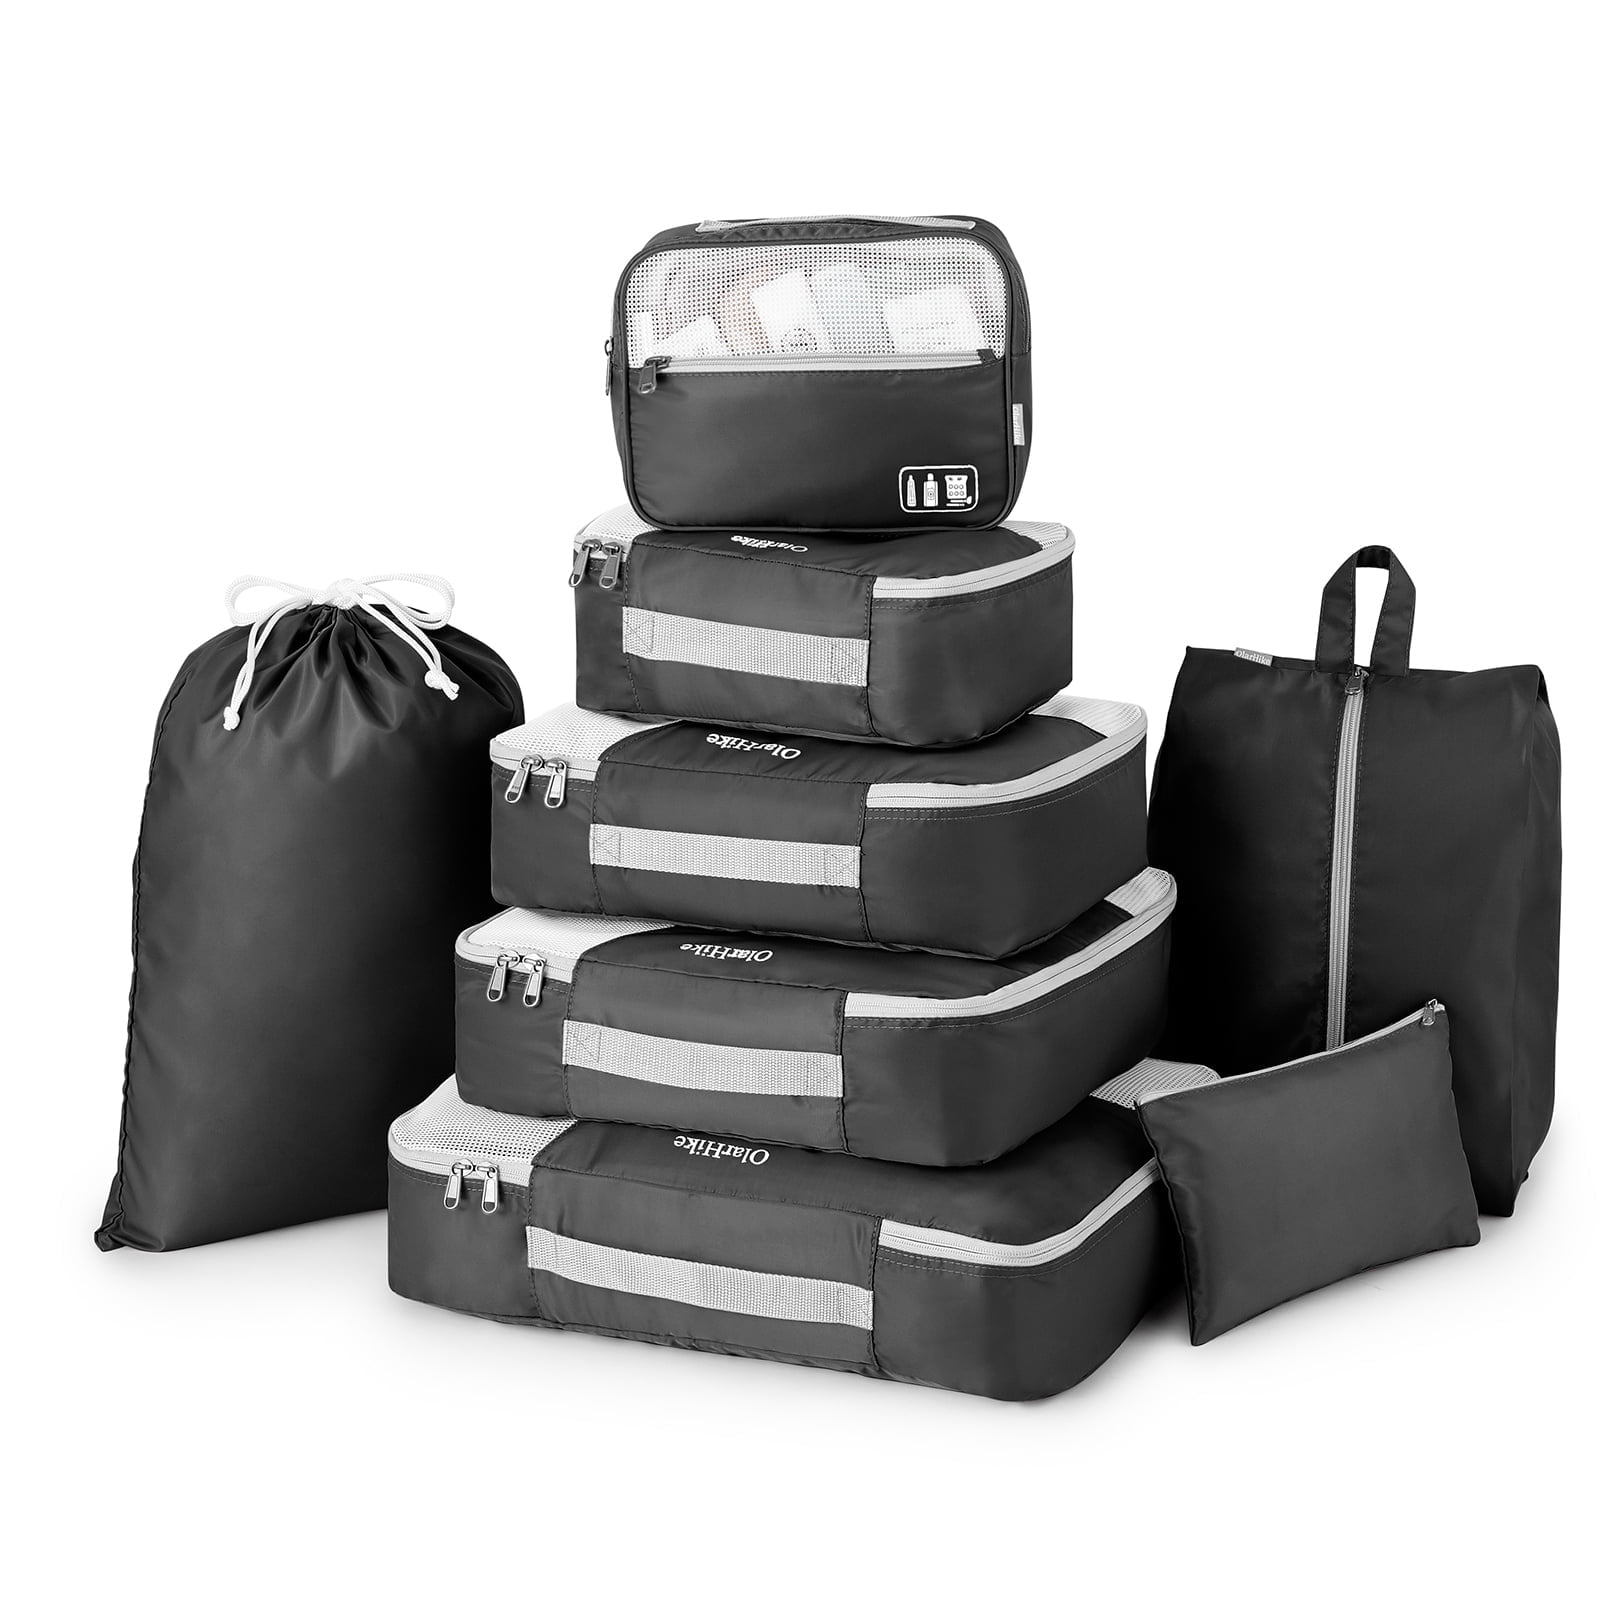  Large Packing Cubes for Travel-Extra Large Compression Luggage  Organizers 7 Piece Set-Ultralight, Expandable/Compression Bags for Clothes  by TRIPPED Travel Gear (DustyTeal/White) : Clothing, Shoes & Jewelry